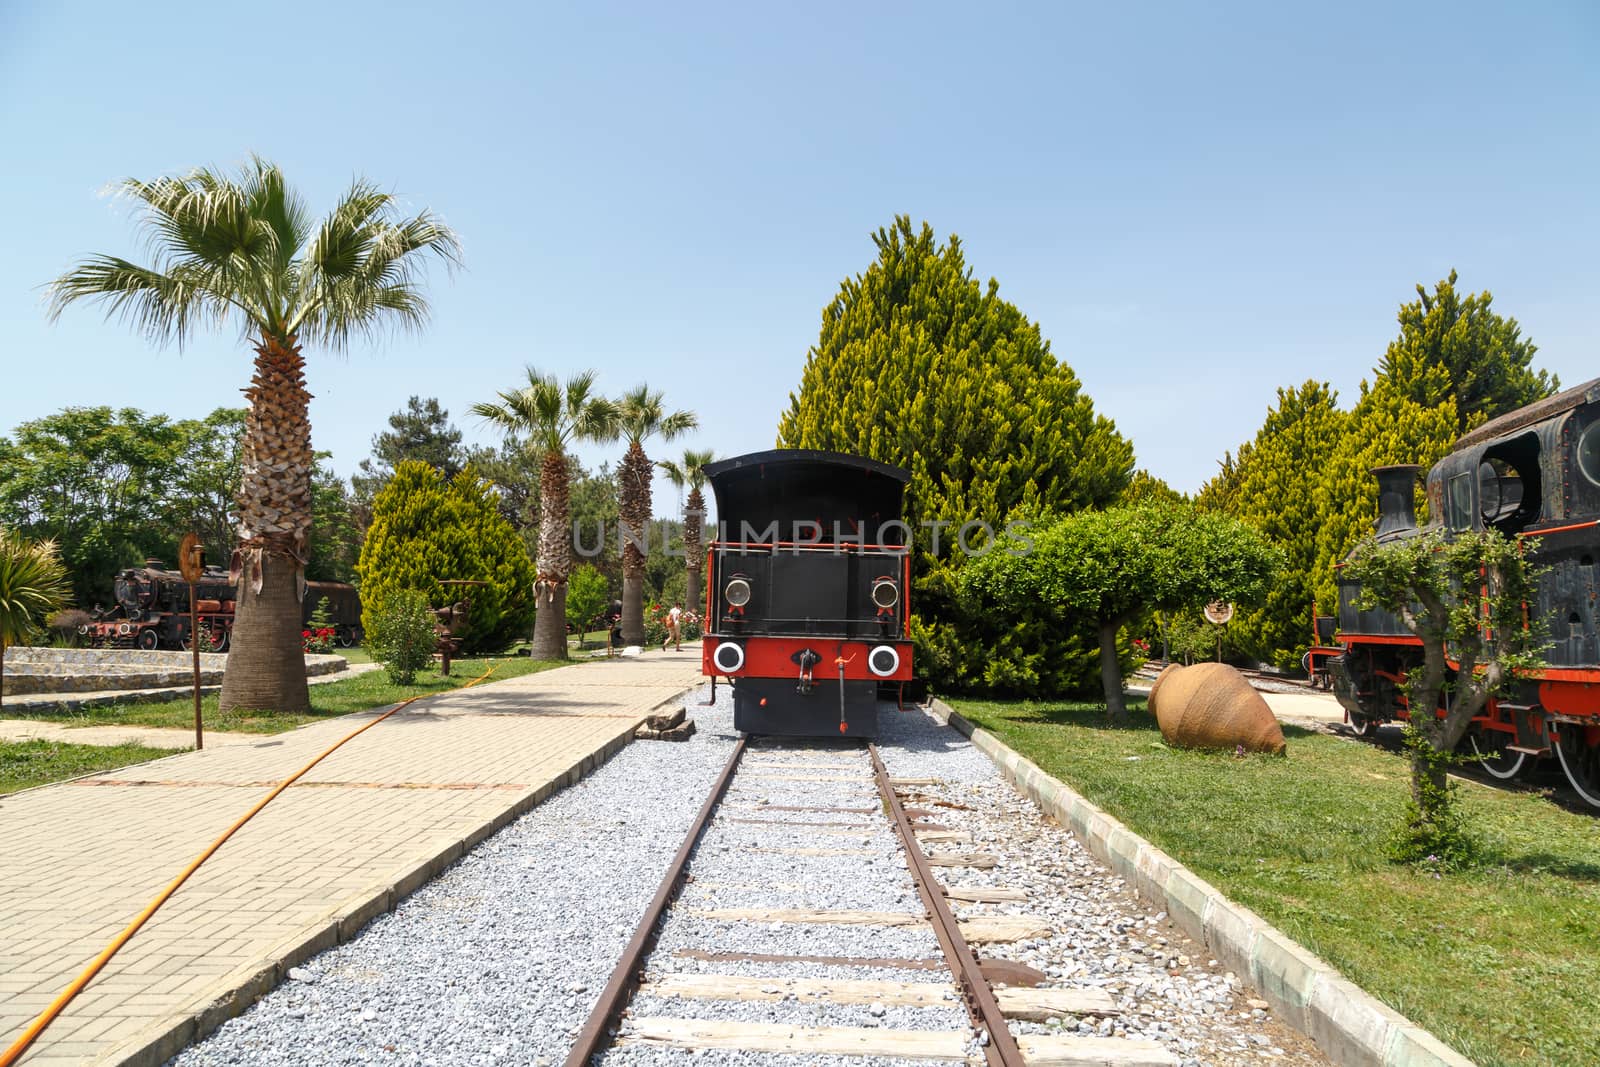 View of historical old rusty iron train locomotives, on blue sky background.